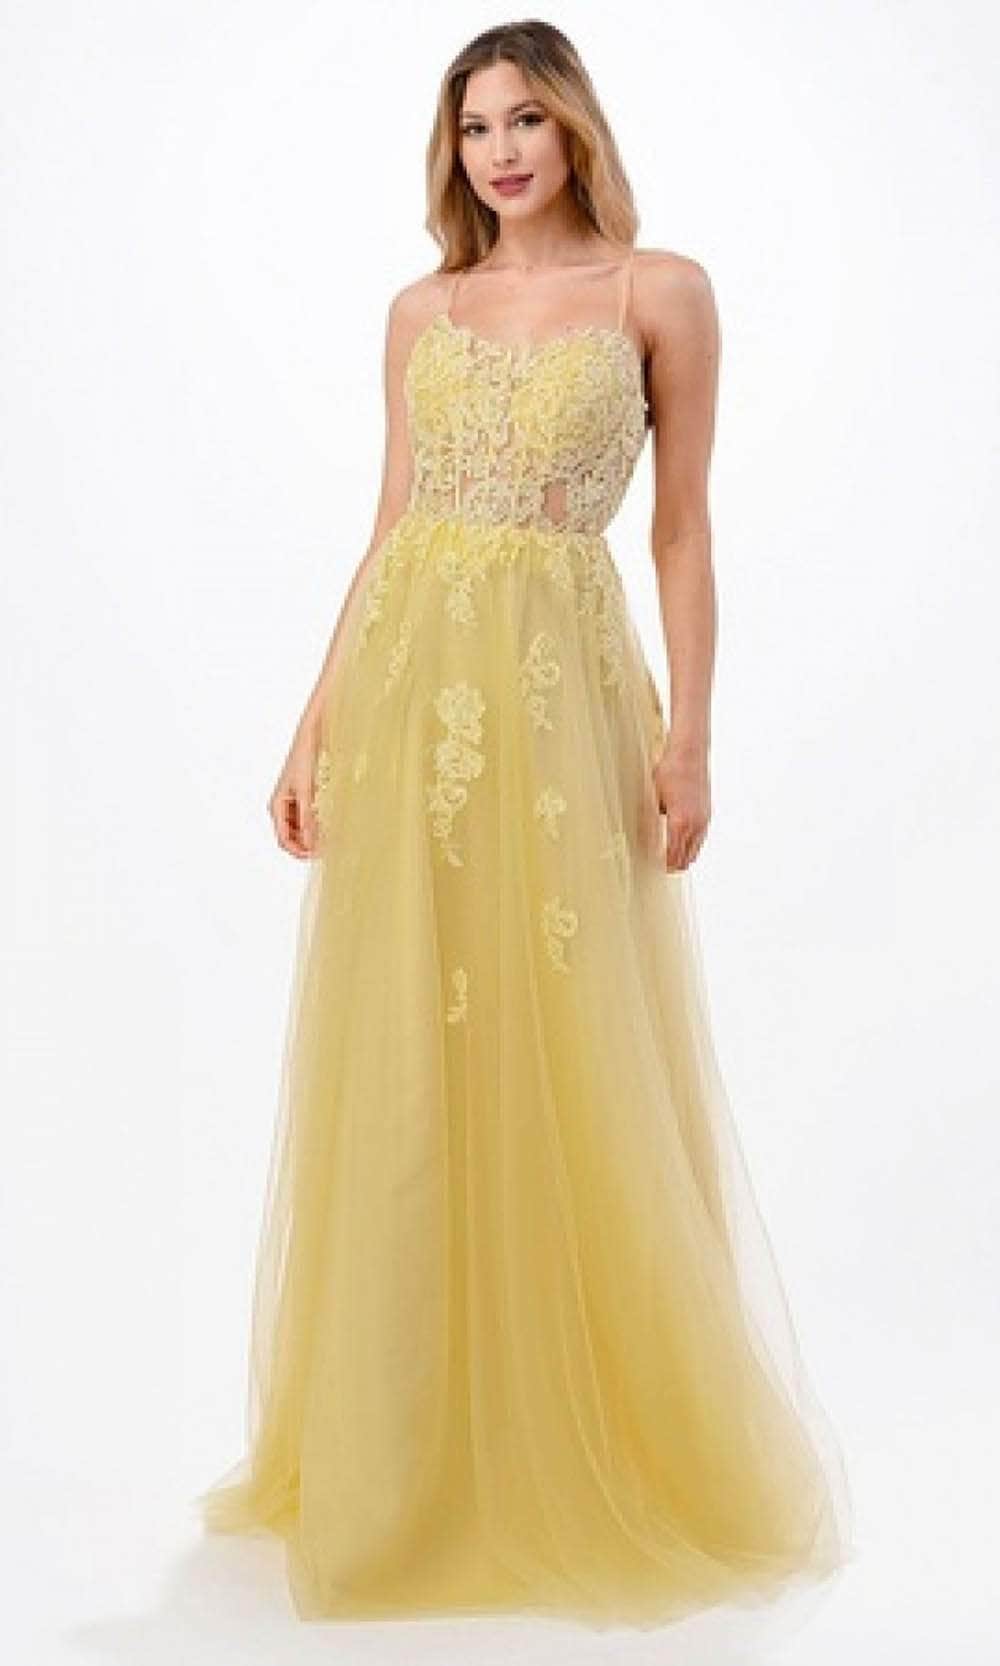 Image of Aspeed Design L2657 - Lace Applique Sleeveless Prom Dress